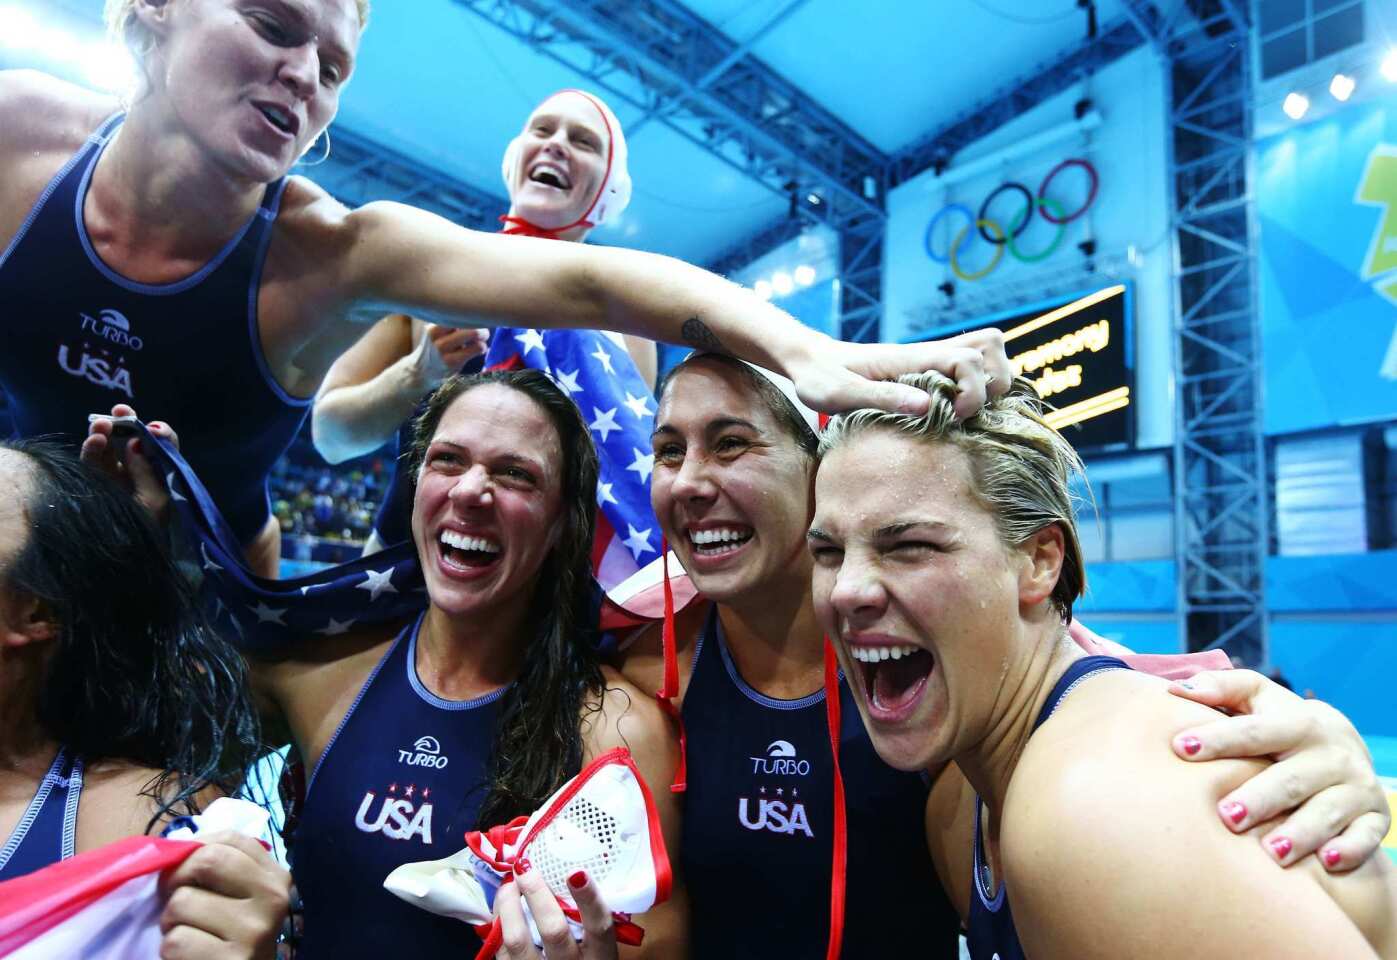 U.S. players celebrate winning the women's water polo gold medal match between the United States and Spain.